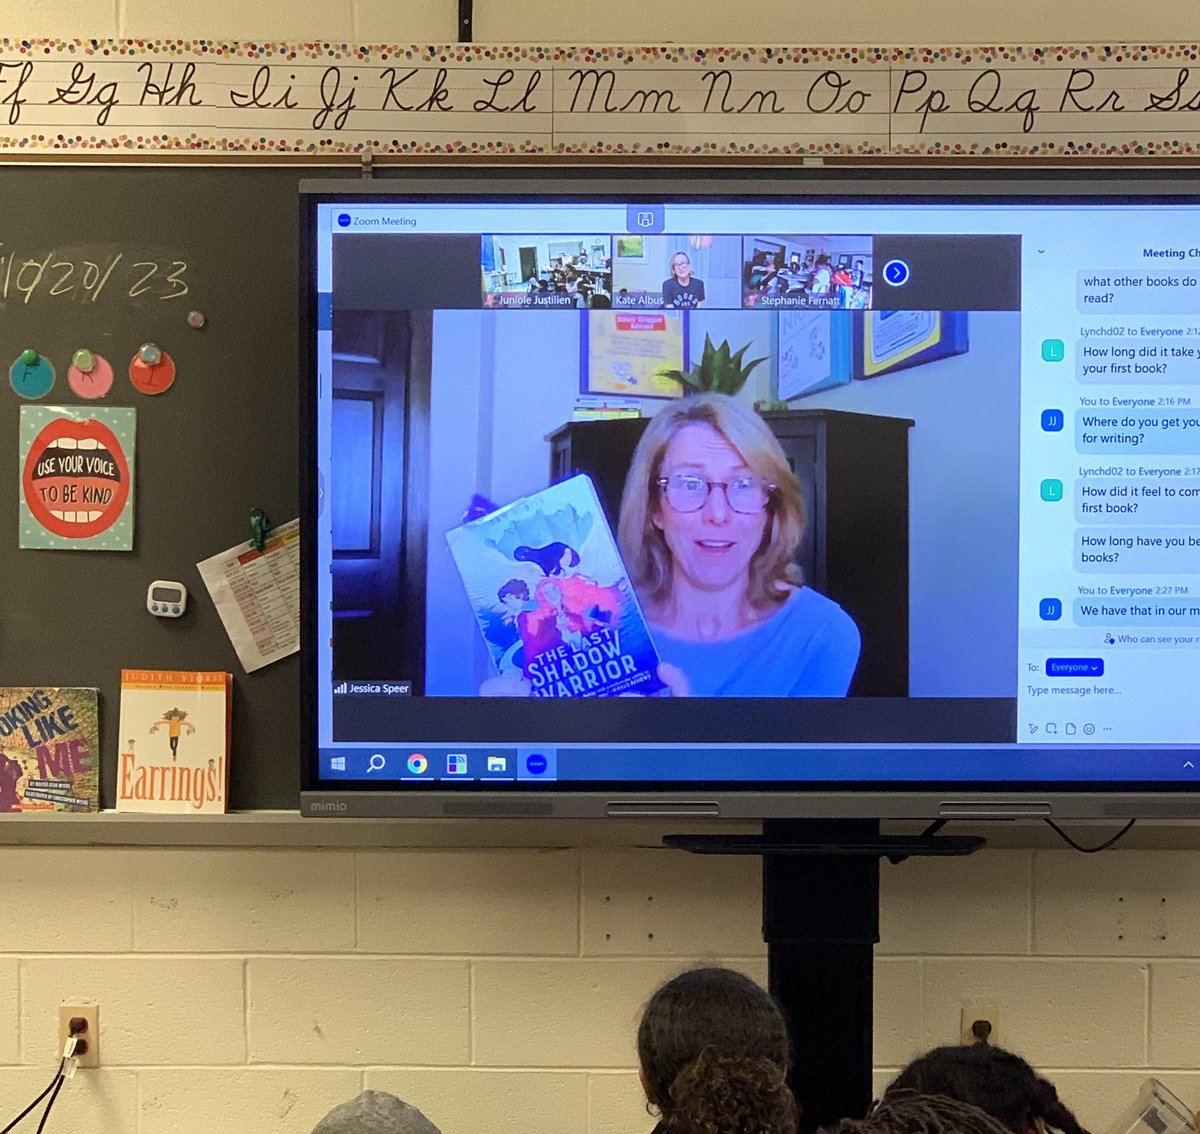 Our school’s 5th grade readers are still talking about Friday’s visit with @mgauthorcade authors! They loved hearing from the authors about their latest books, their writing process, their inspiration for writing, and their favorite books. Definitely a highlight for the week!